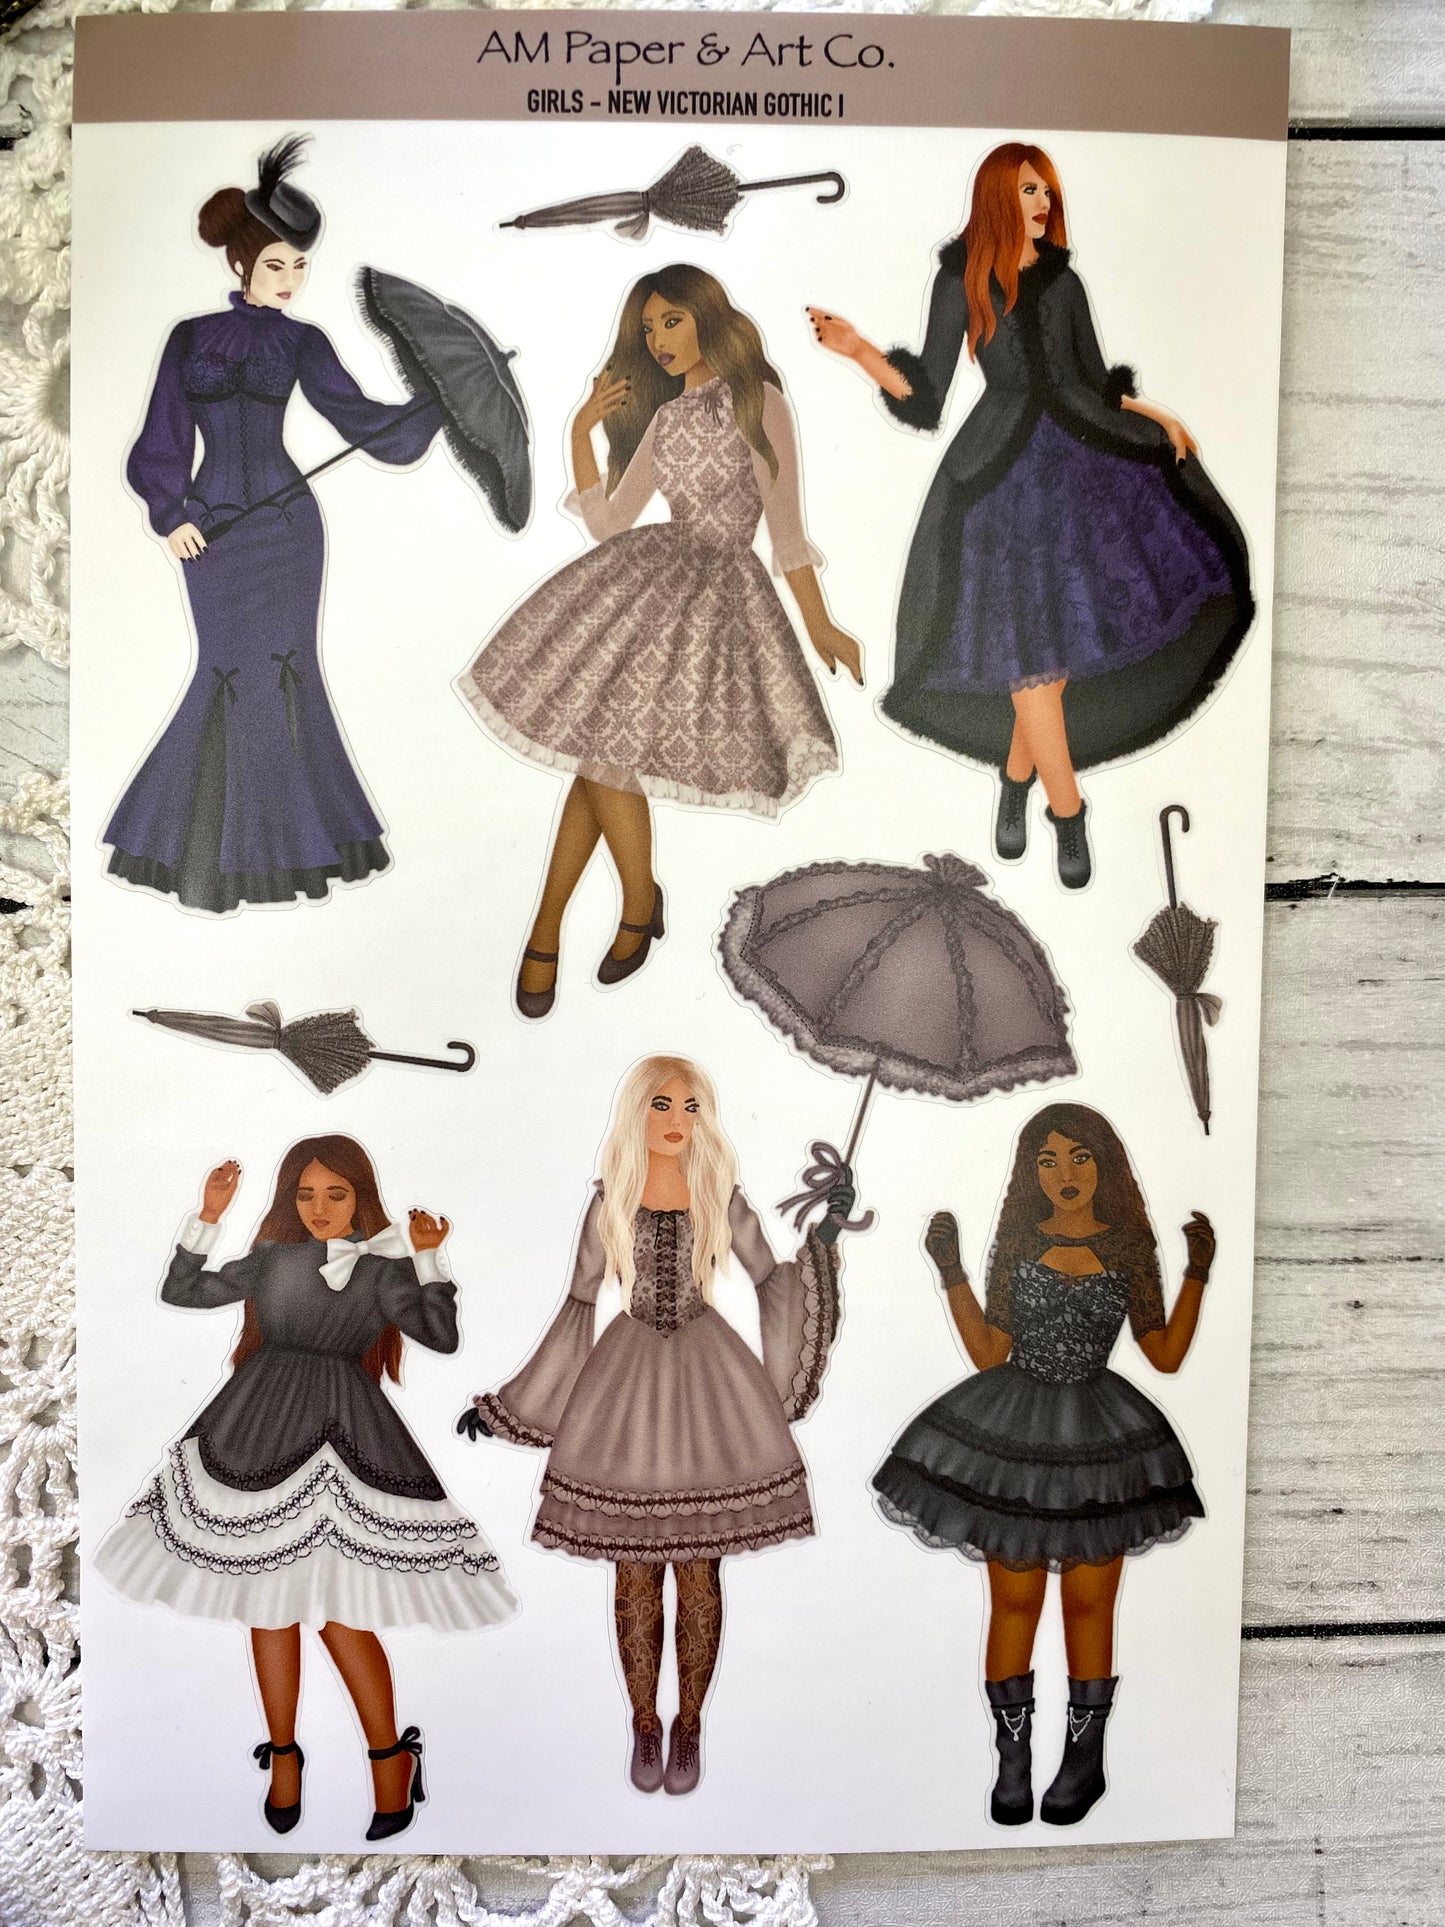 New Victorian Gothic Girl Stickers